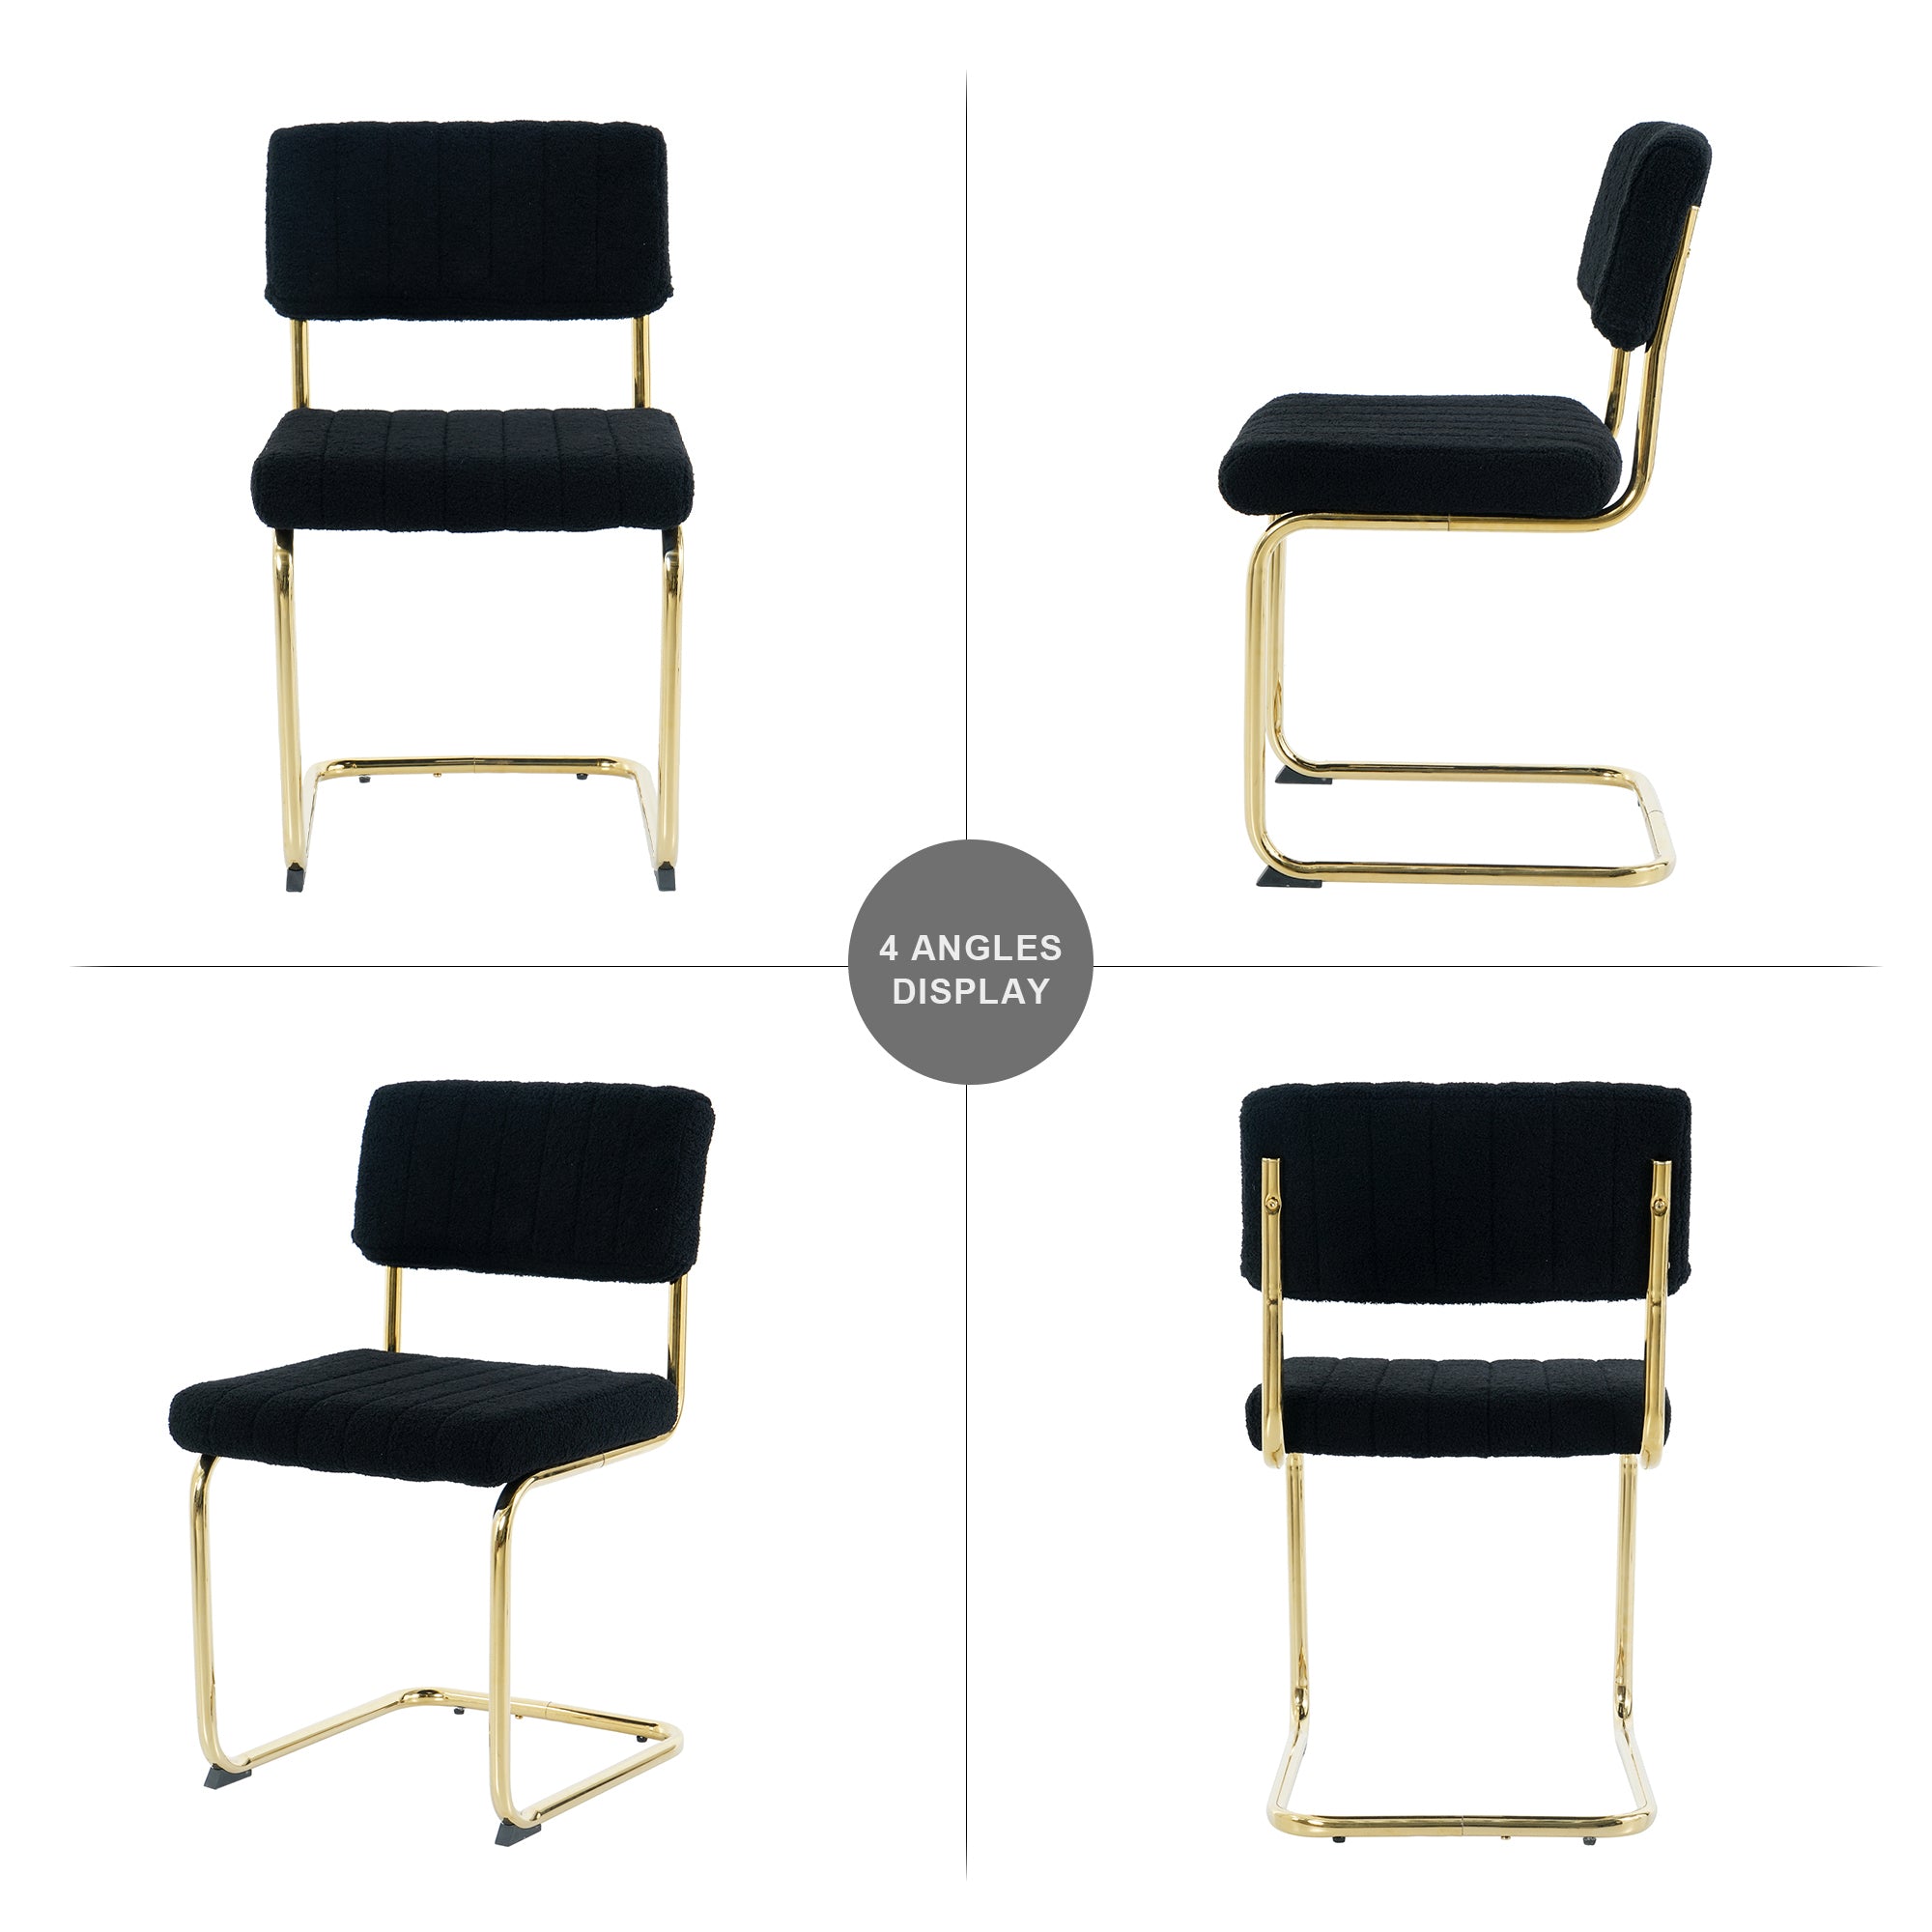 Luxury Dining Black Chairs with Gold Metal Legs (Set of 4) - Black